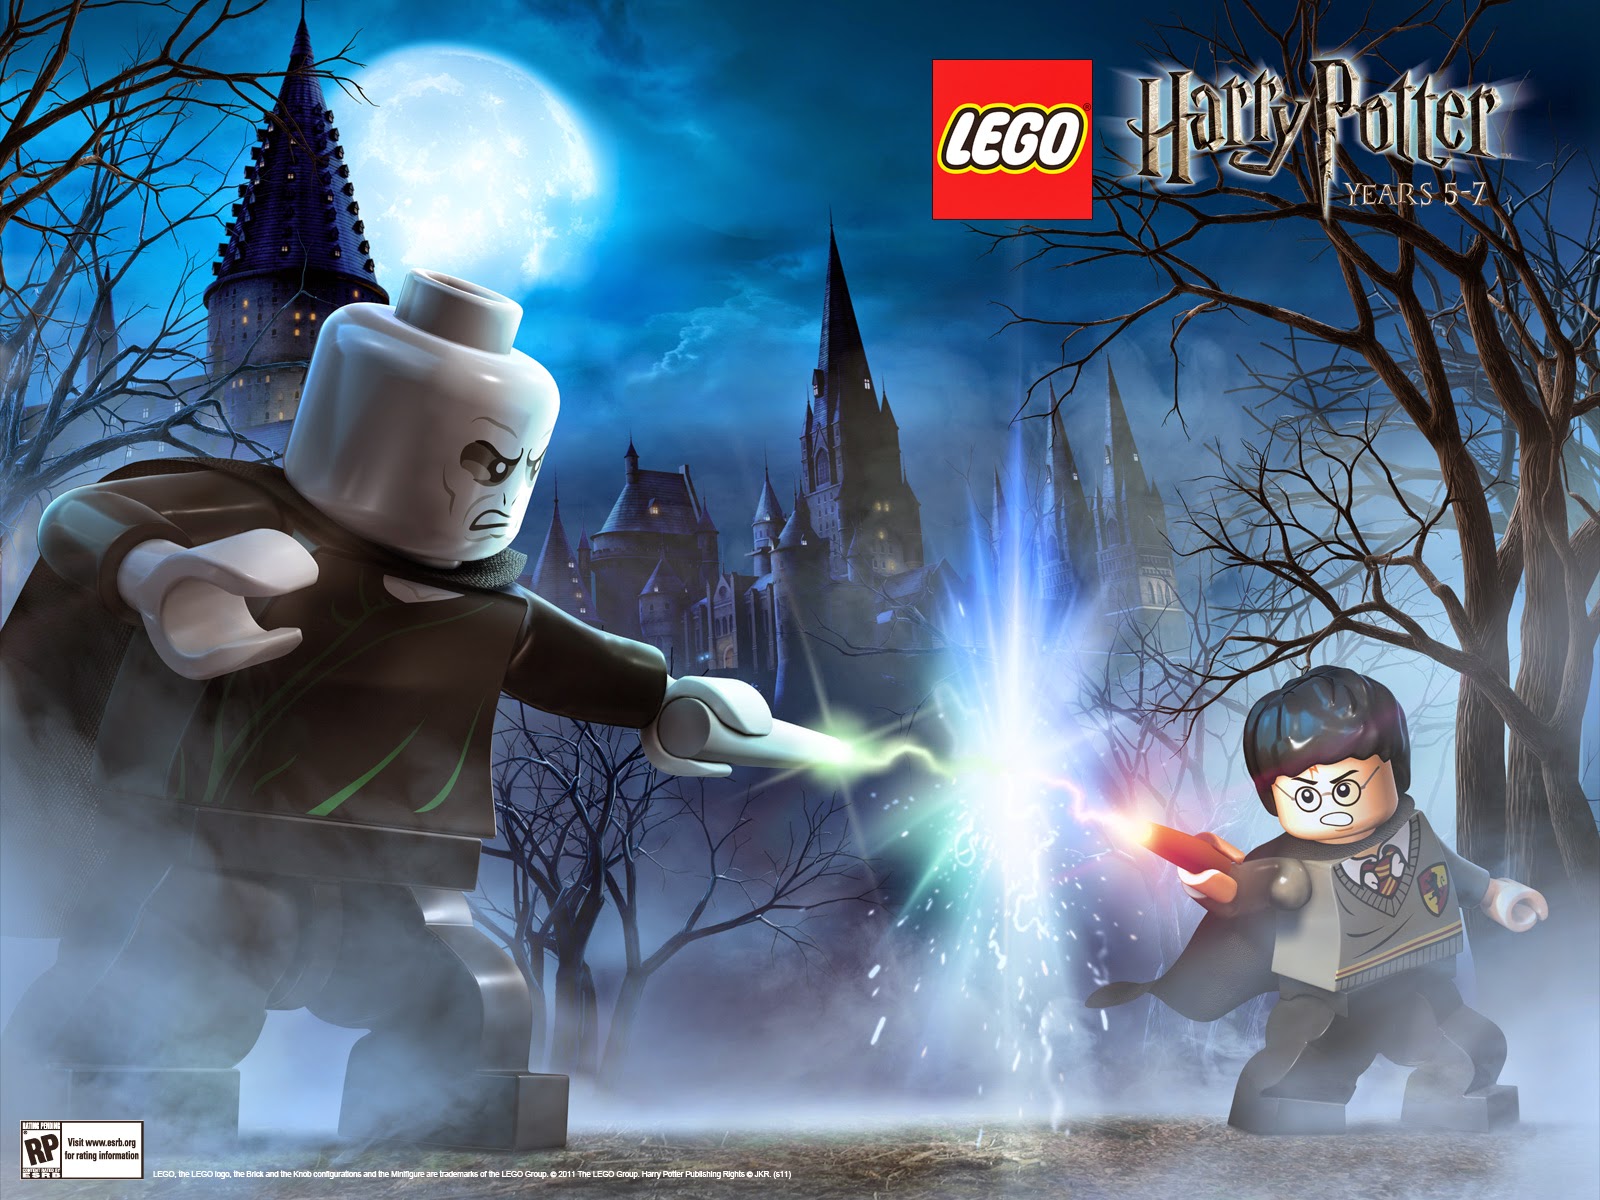 Lego Harry Potter Years Game Android Free Download - Lego Harry Potter Games Xbox One - HD Wallpaper 